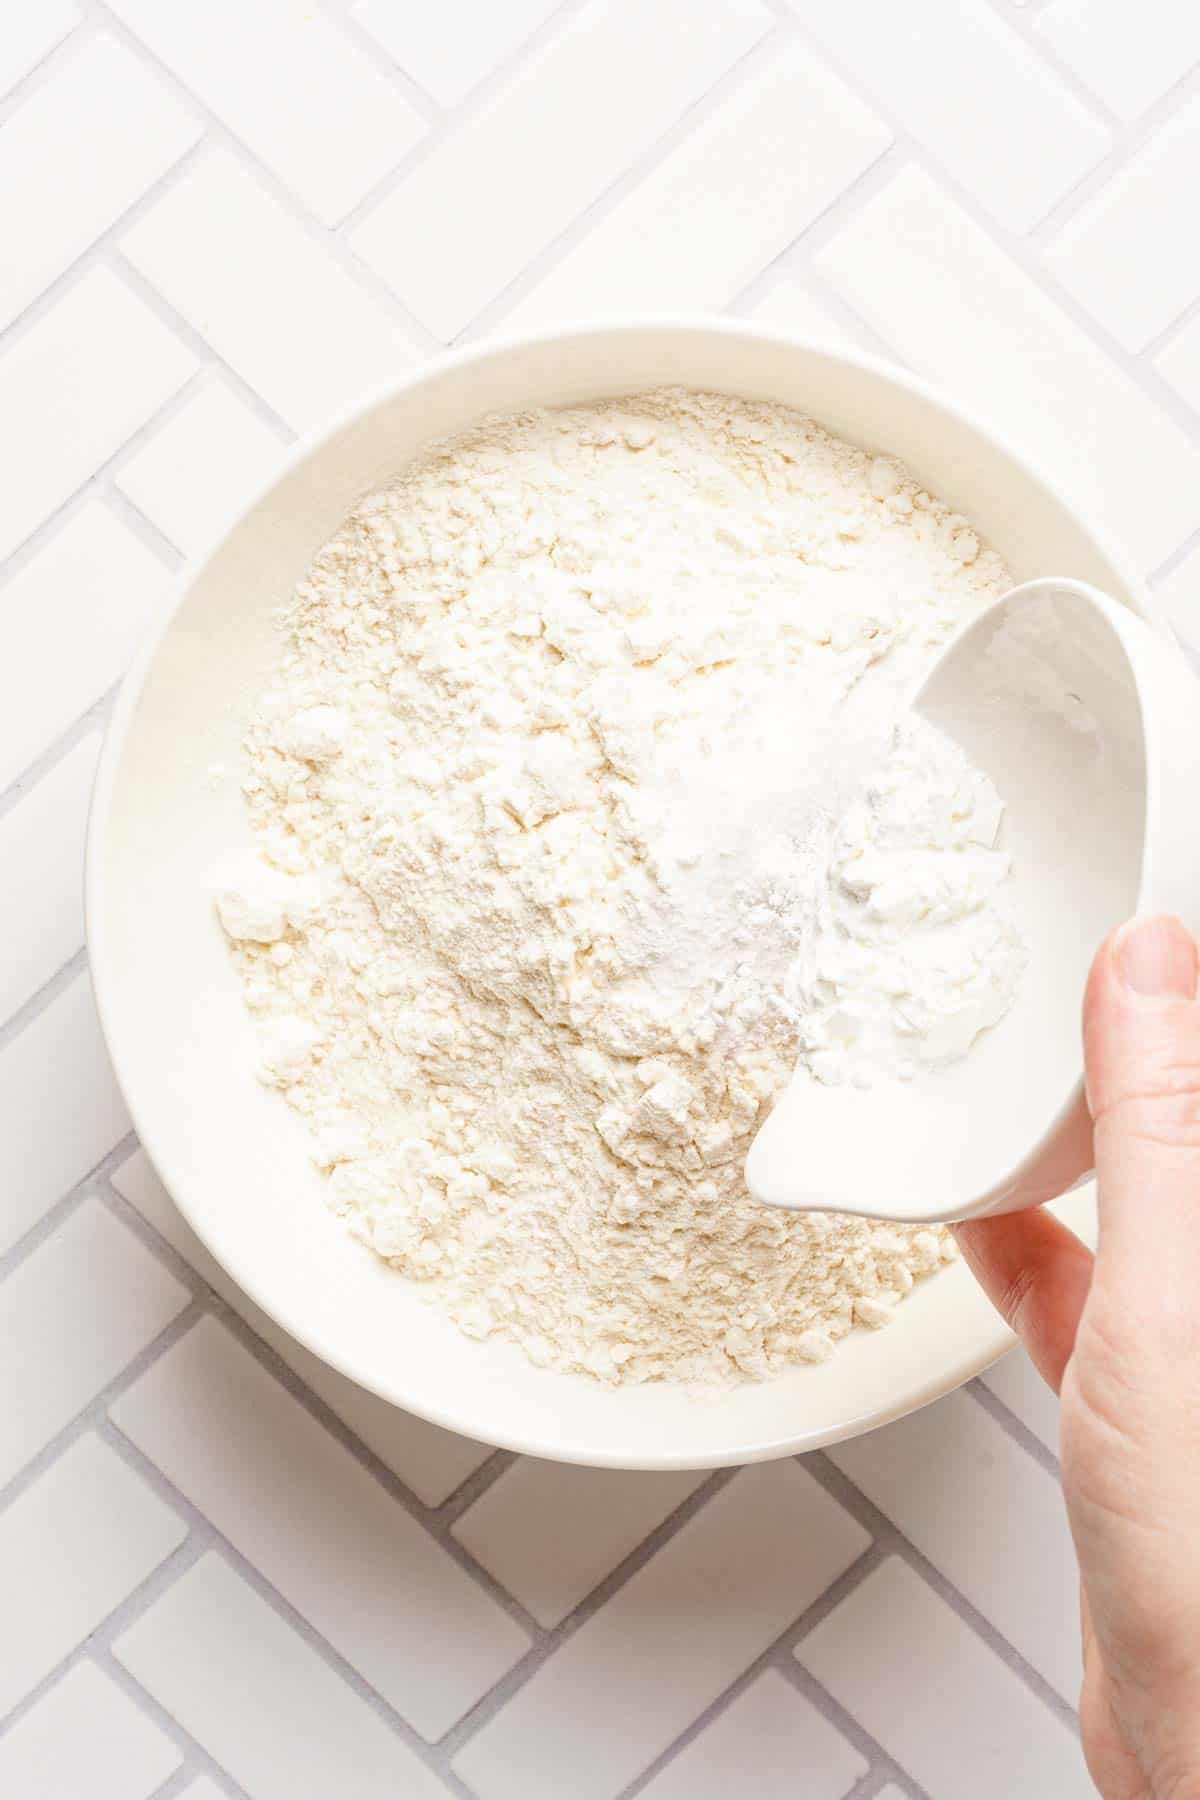 small dish of salt and baking powder being added to a bowl of flour.